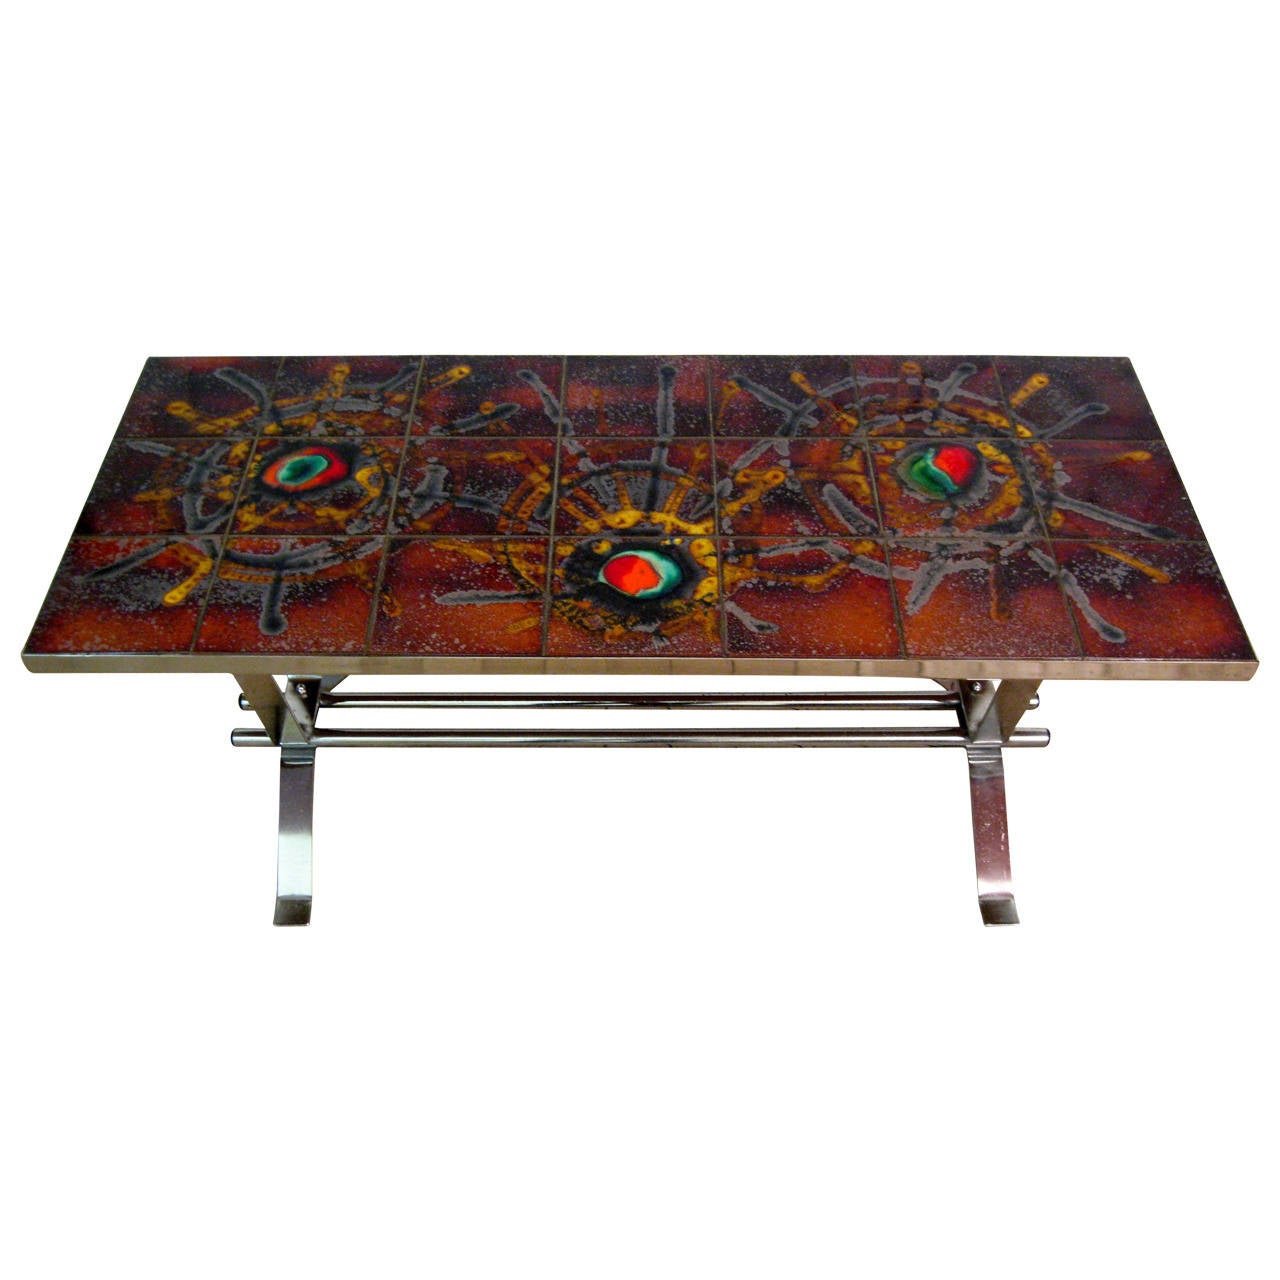 MidCentury Modern Abstract TileTop Coffee Table at 1stdibs